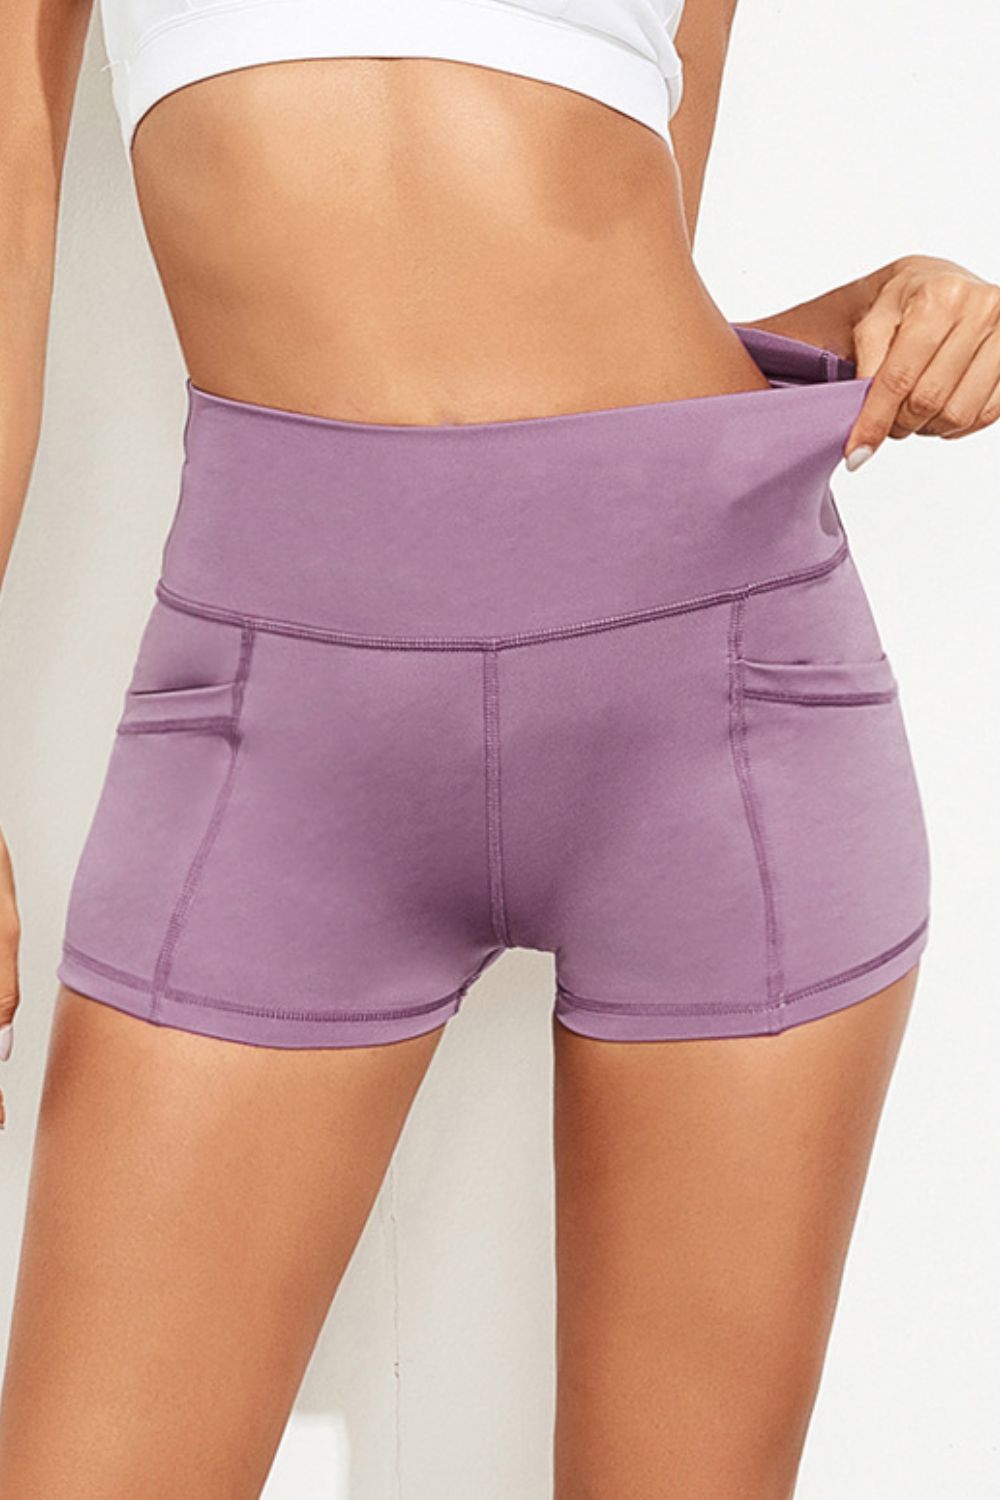 Rosy Brown It's All Good Exposed Seam High Waist Yoga Shorts Activewear